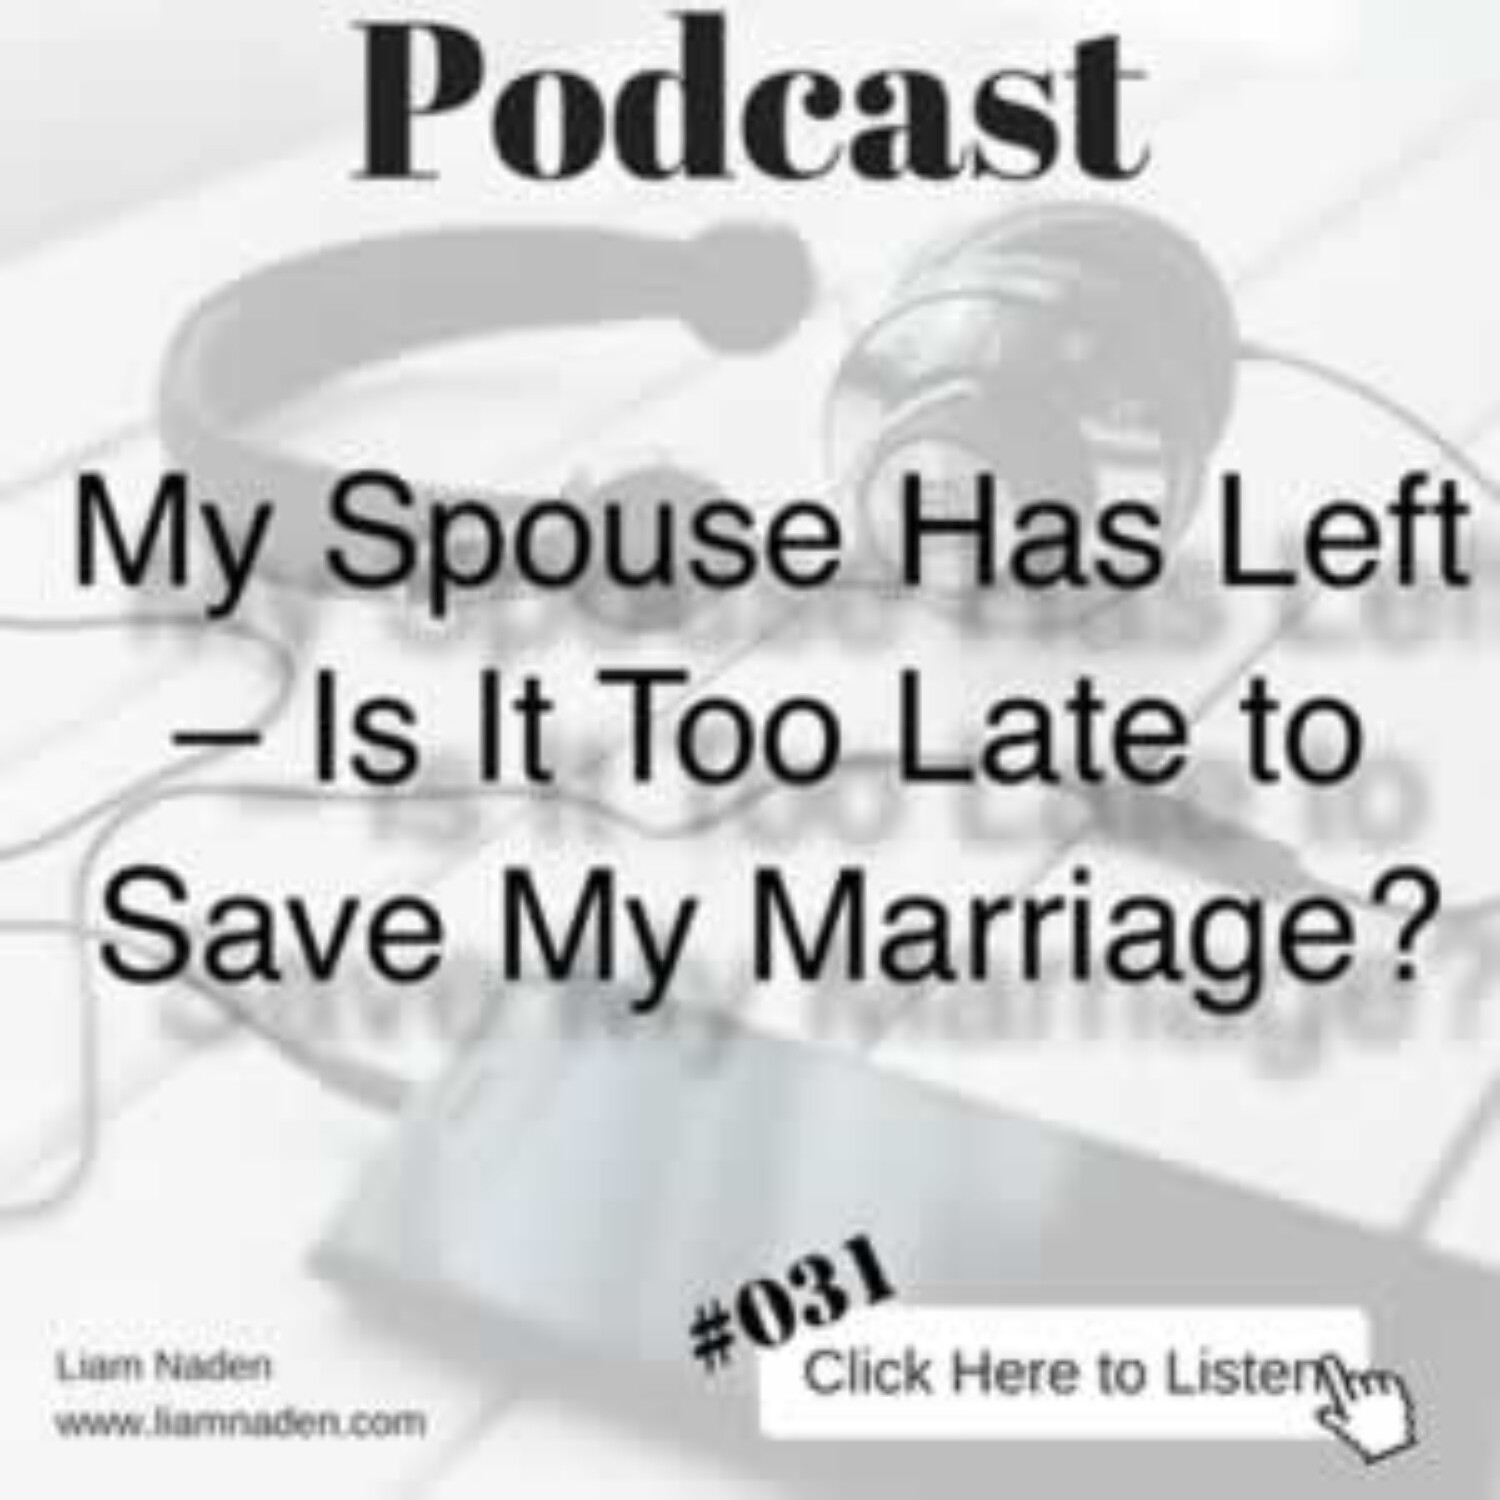 GILFL 031 : My Spouse Has Left - Is It Too Late to Save My Marriage?